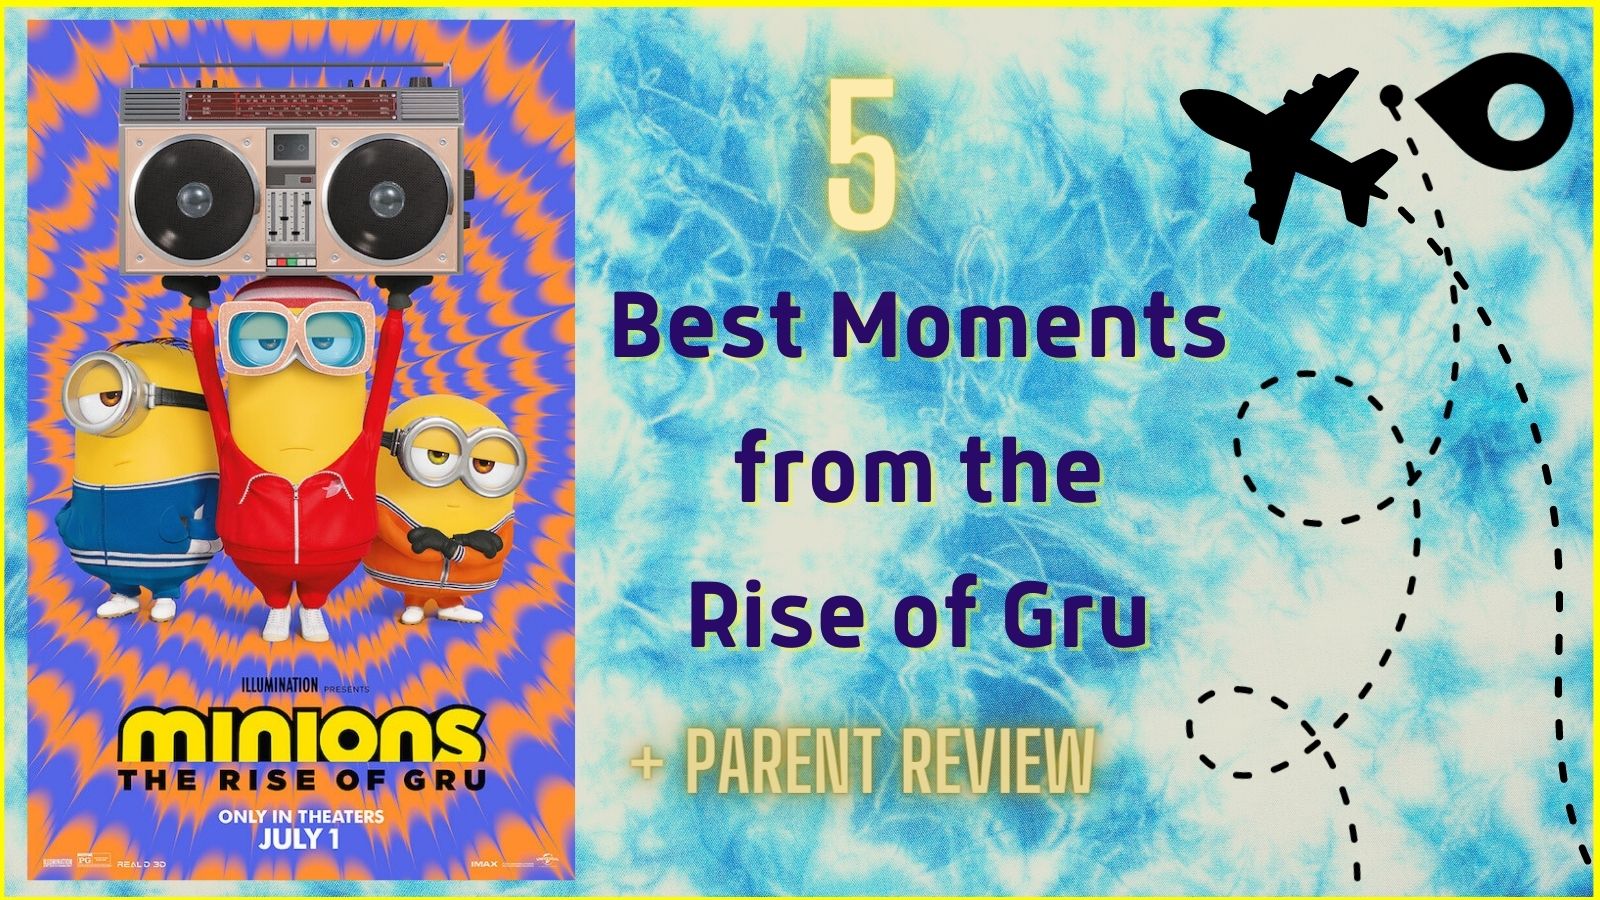 5 Best Moments From The Rise of Gru Minions 2 Parent Review posterfromuniversalstudiosmedia